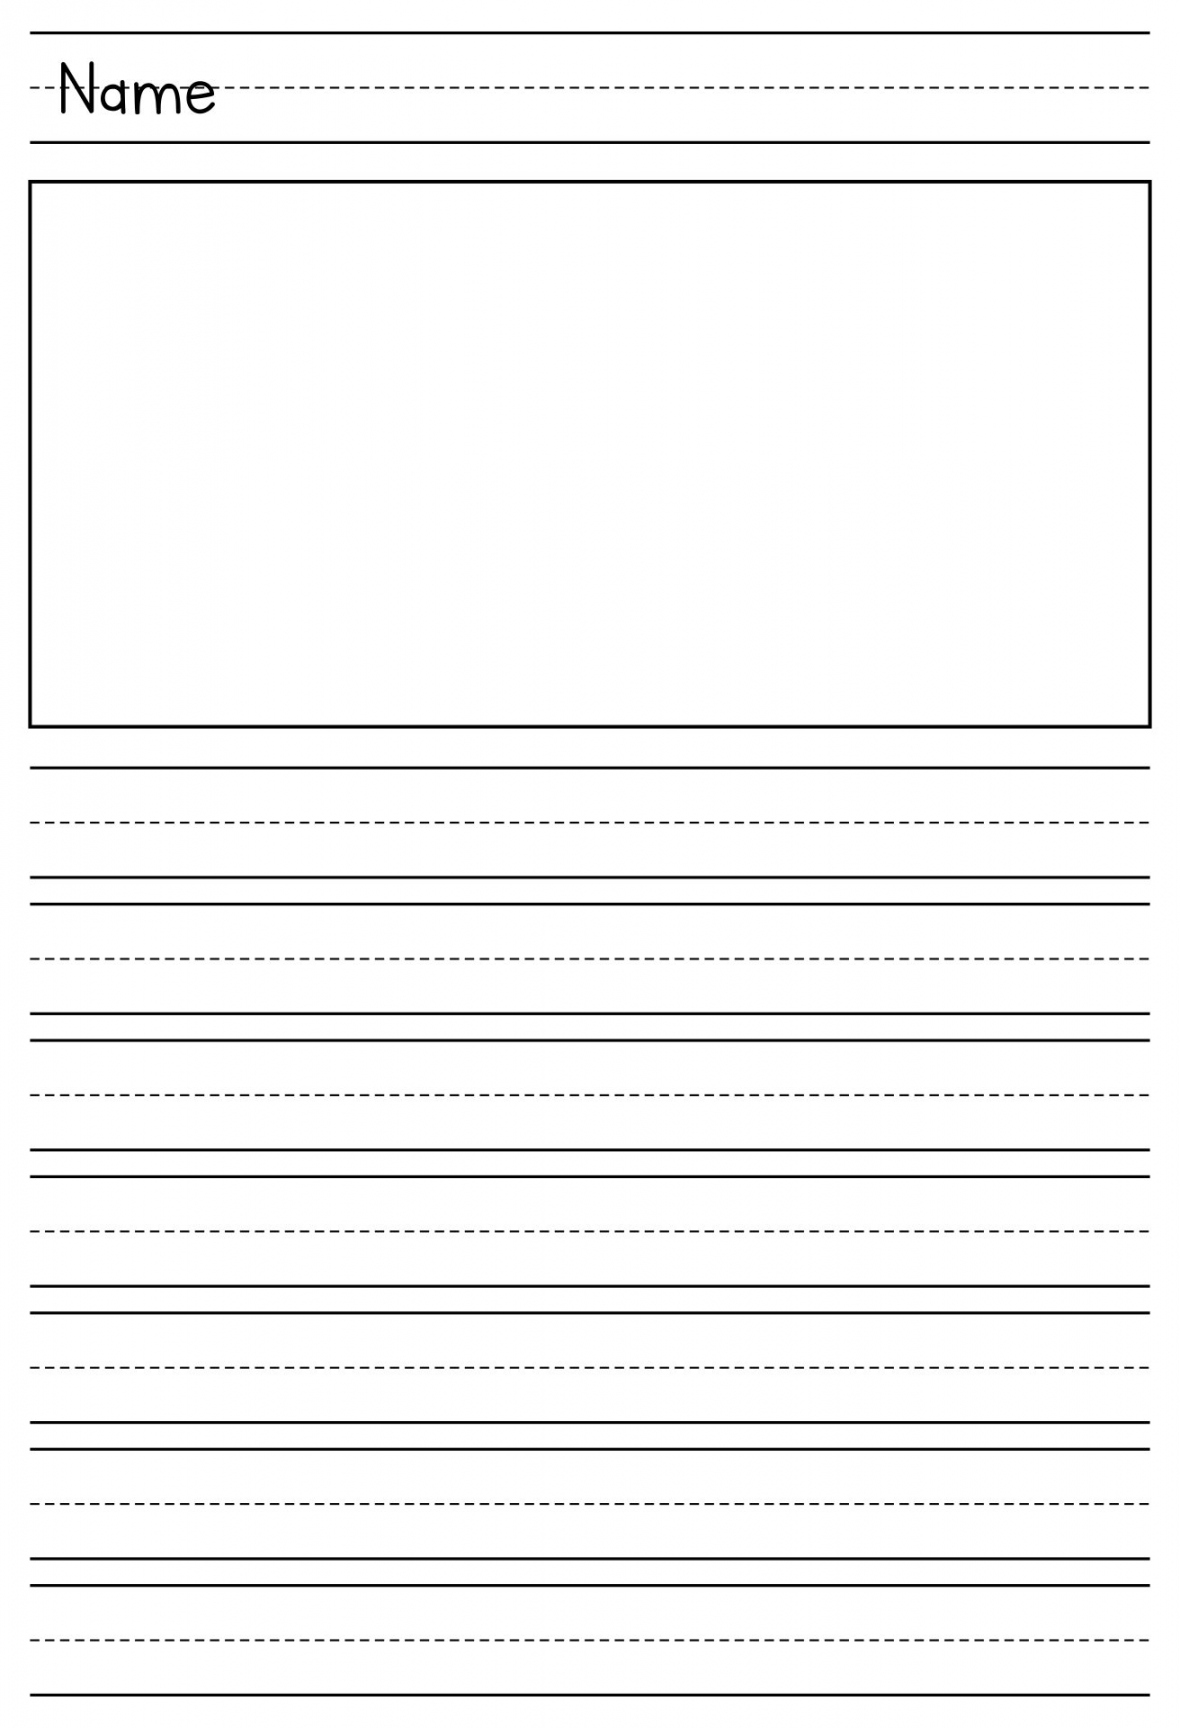 Best Printable Primary Writing Paper Template - printablee - Printable Primary Lined Paper